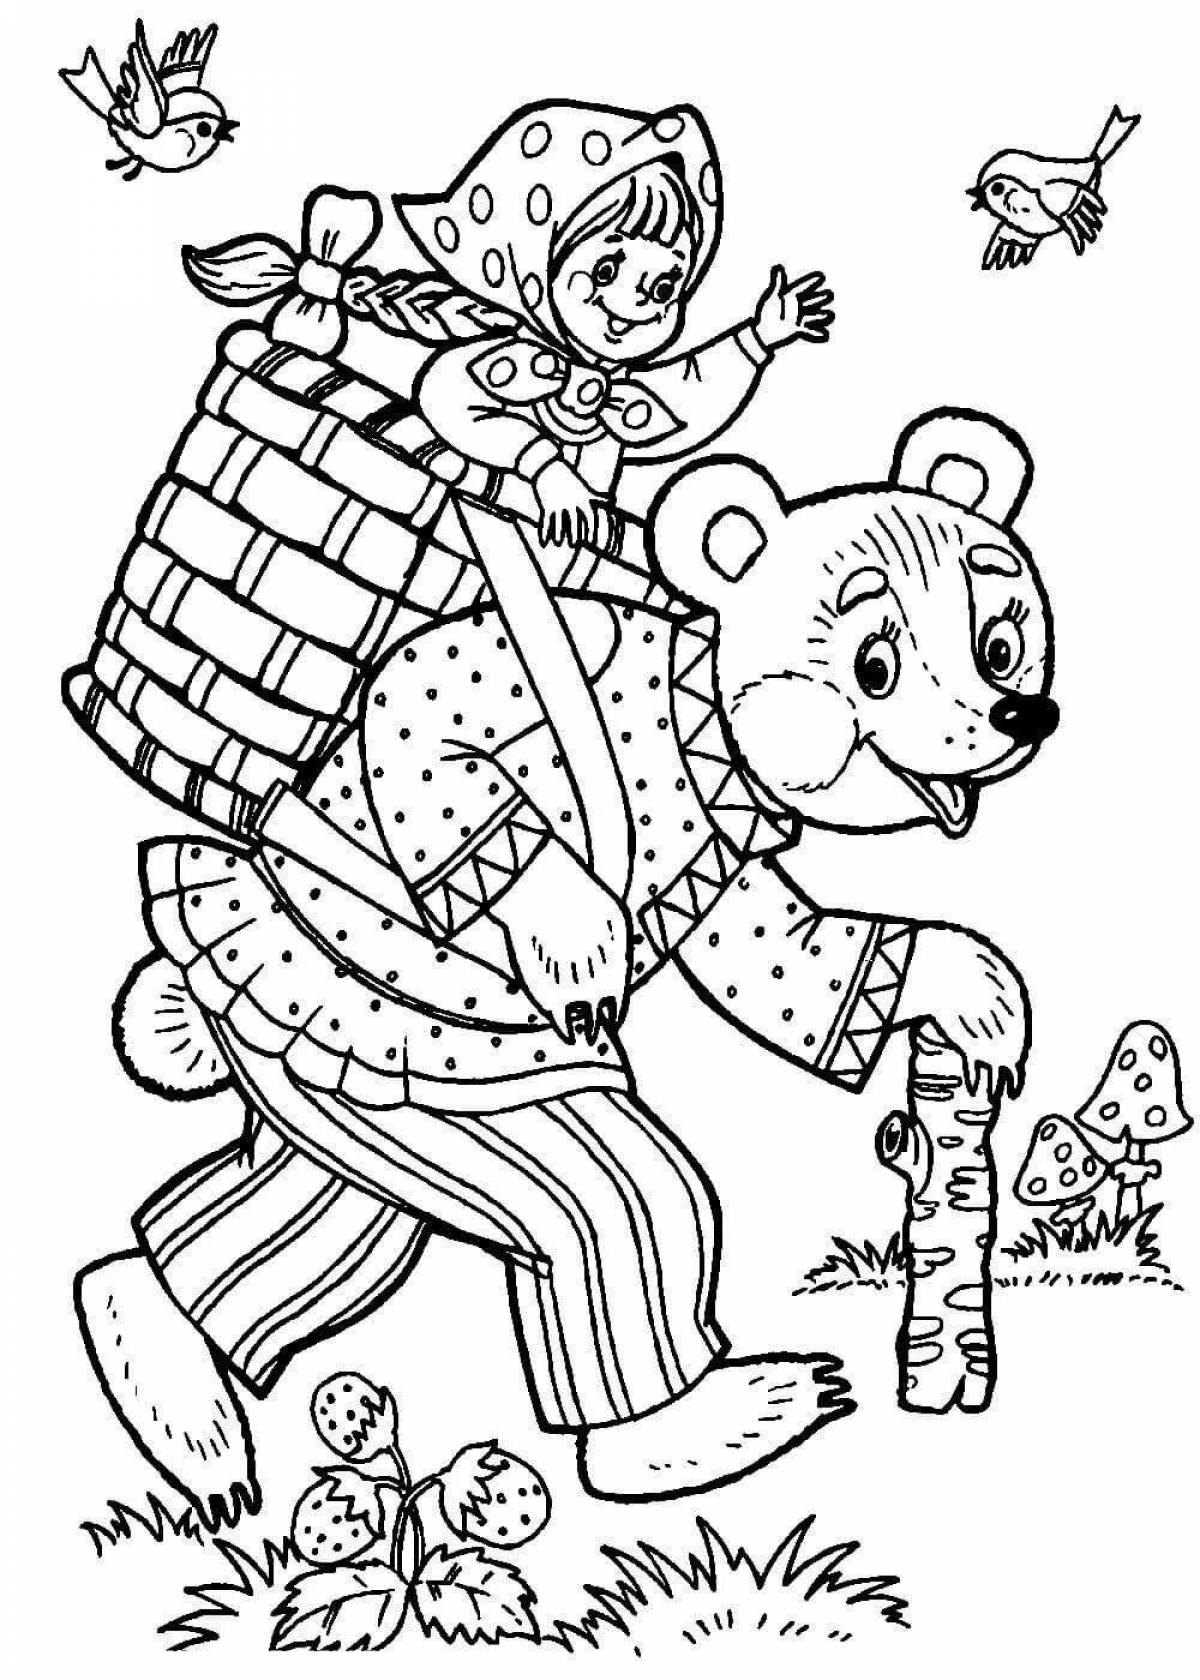 Fascinating coloring book heroes of fairy tales